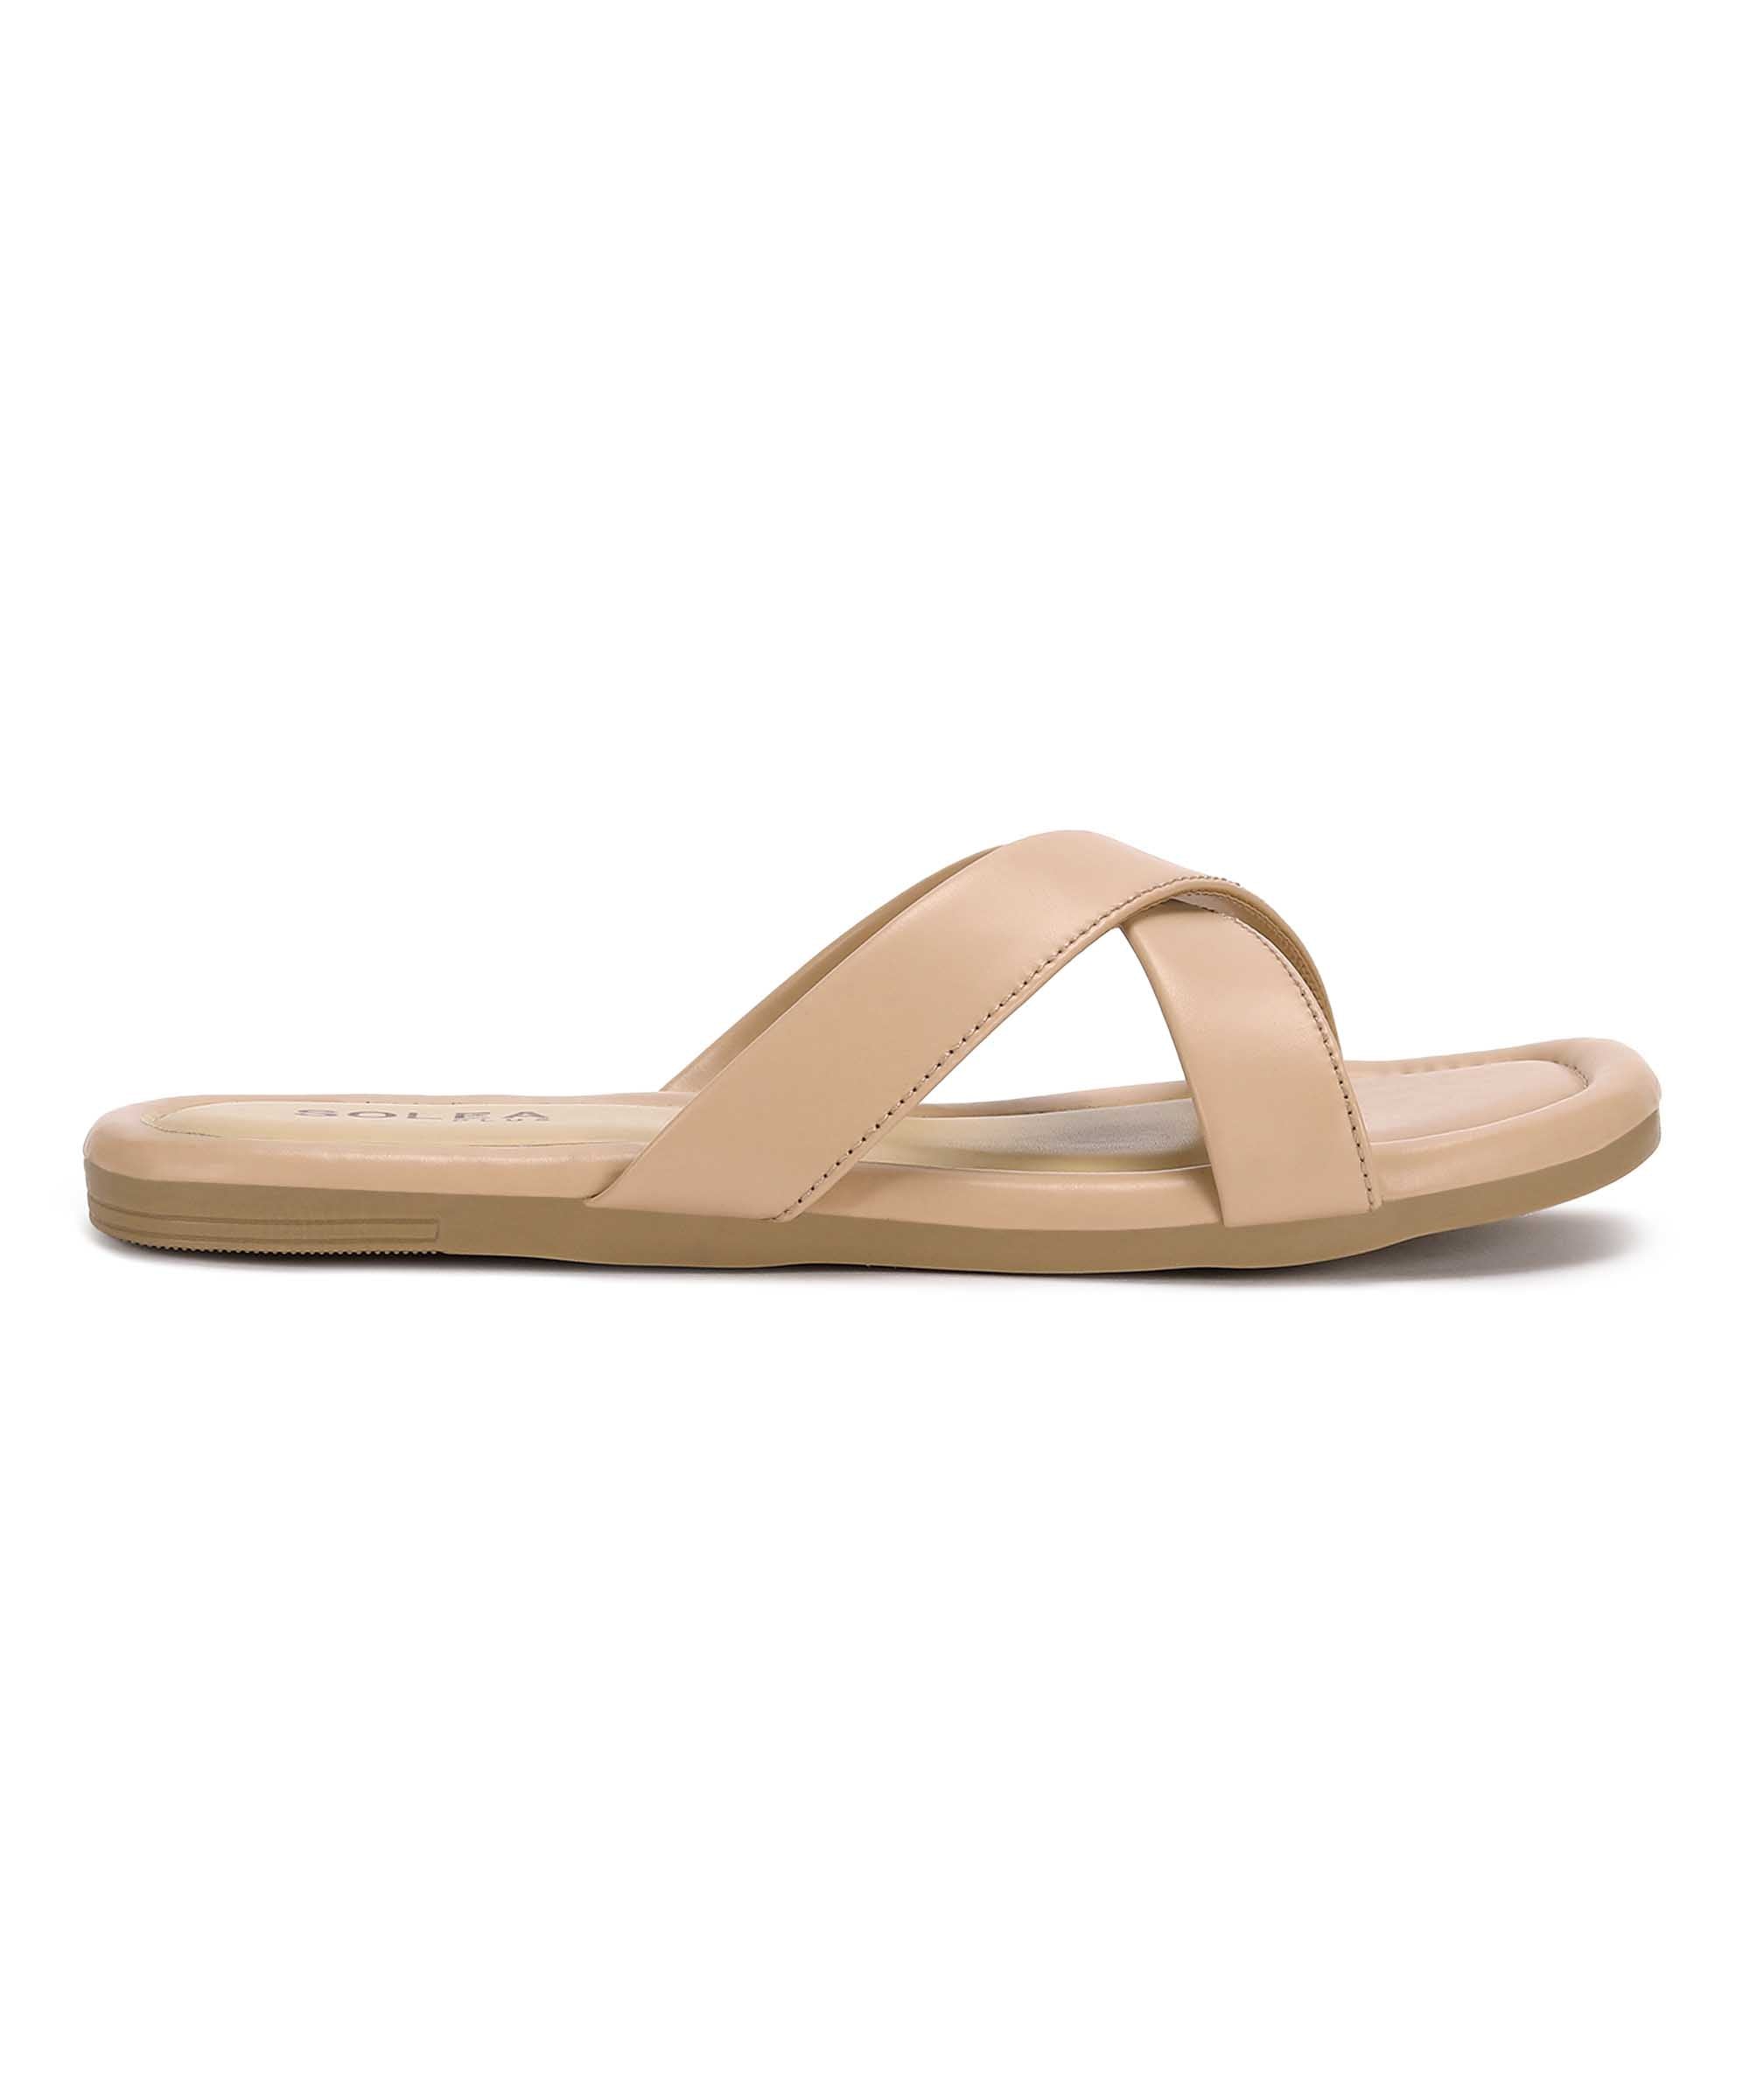 Paragon K6016L Women Sandals | Casual &amp; Formal Sandals | Stylish, Comfortable &amp; Durable | For Daily &amp; Occasion Wear